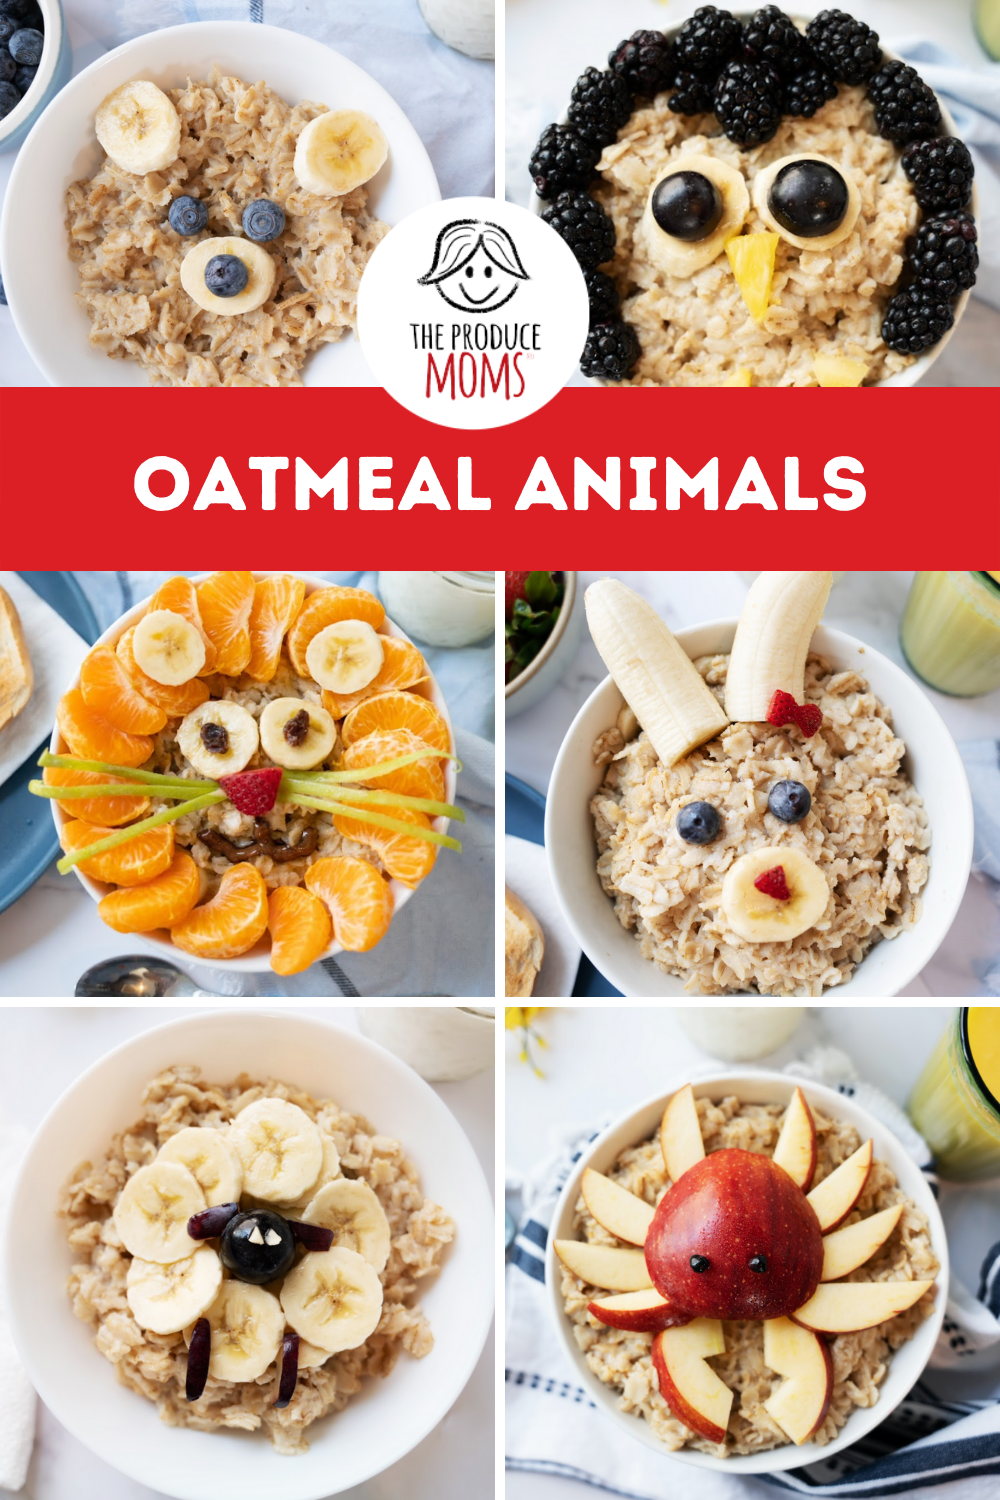 Pinterst Pin with Oatmeal Animals: Lion, bunny, crab, sheep, lion